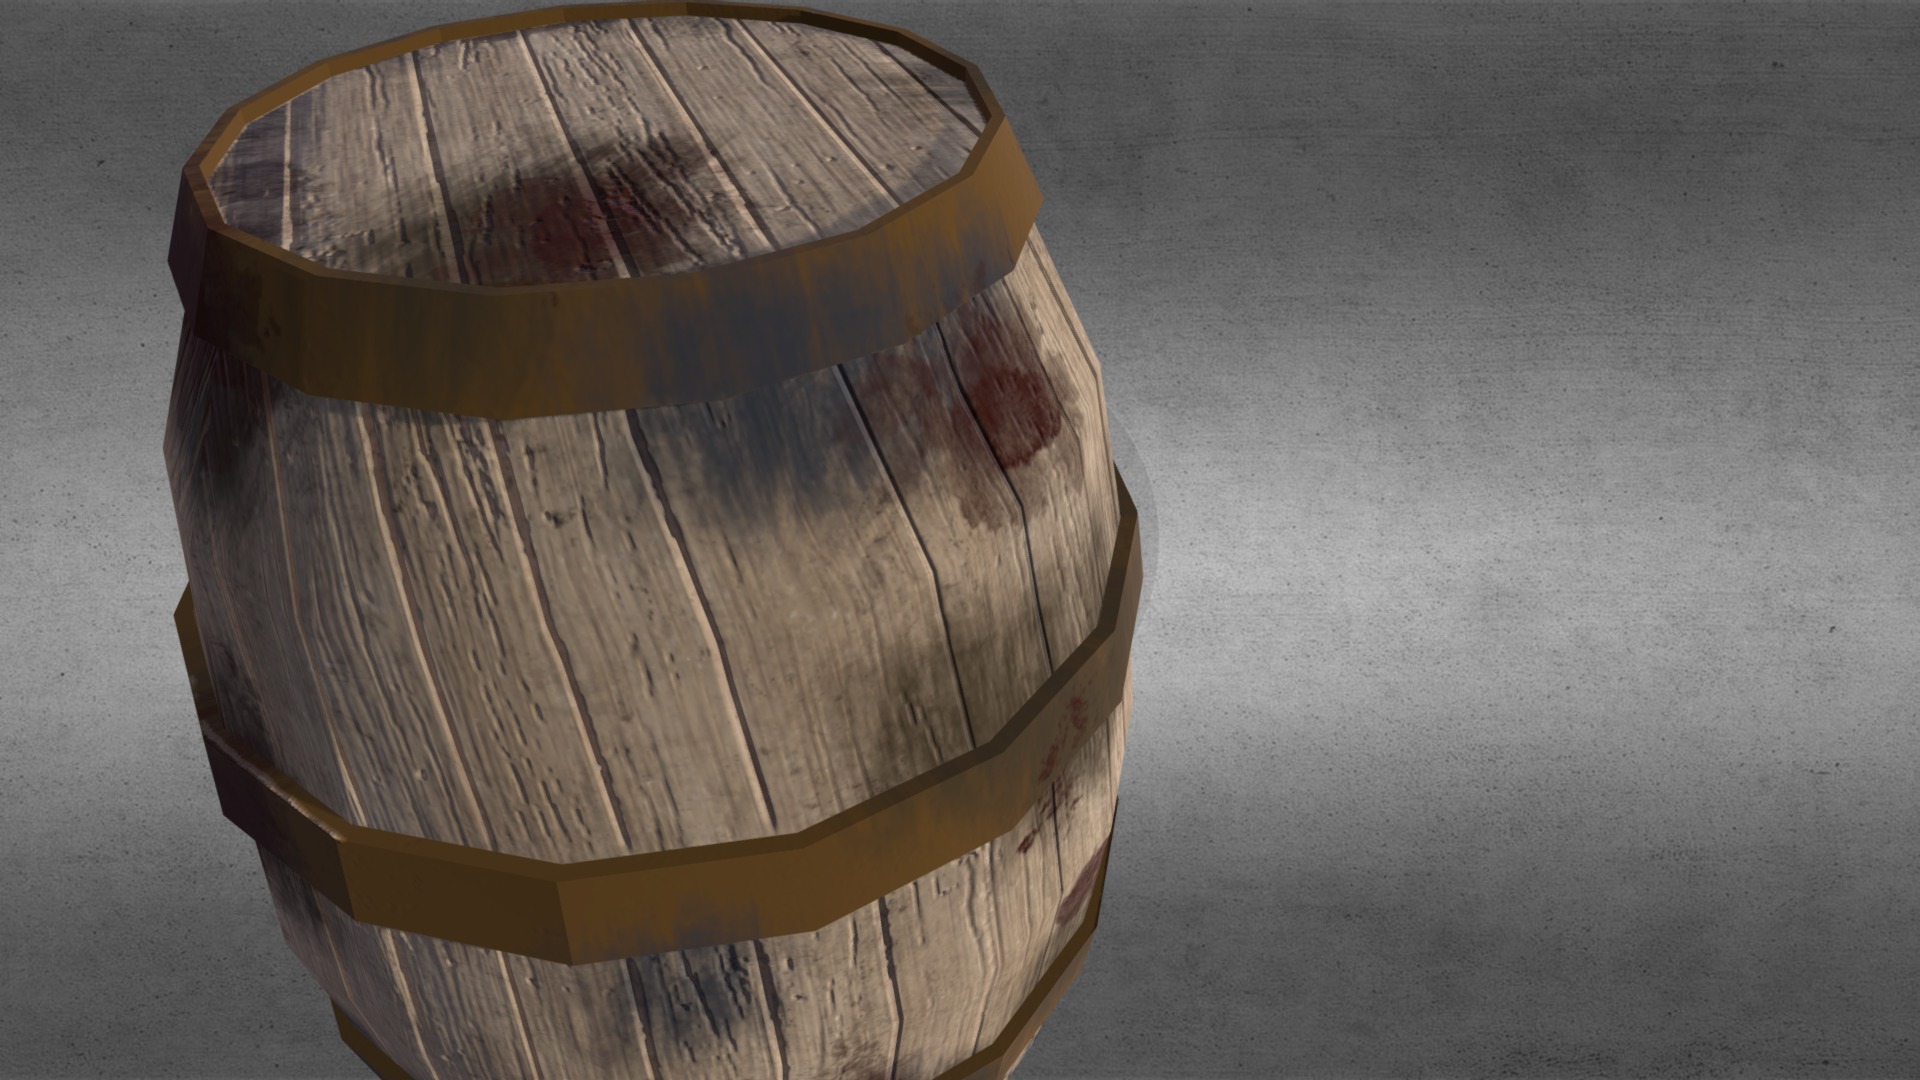 3D model Old Barrel - This is a 3D model of the Old Barrel. The 3D model is about a wooden chair on a concrete surface.